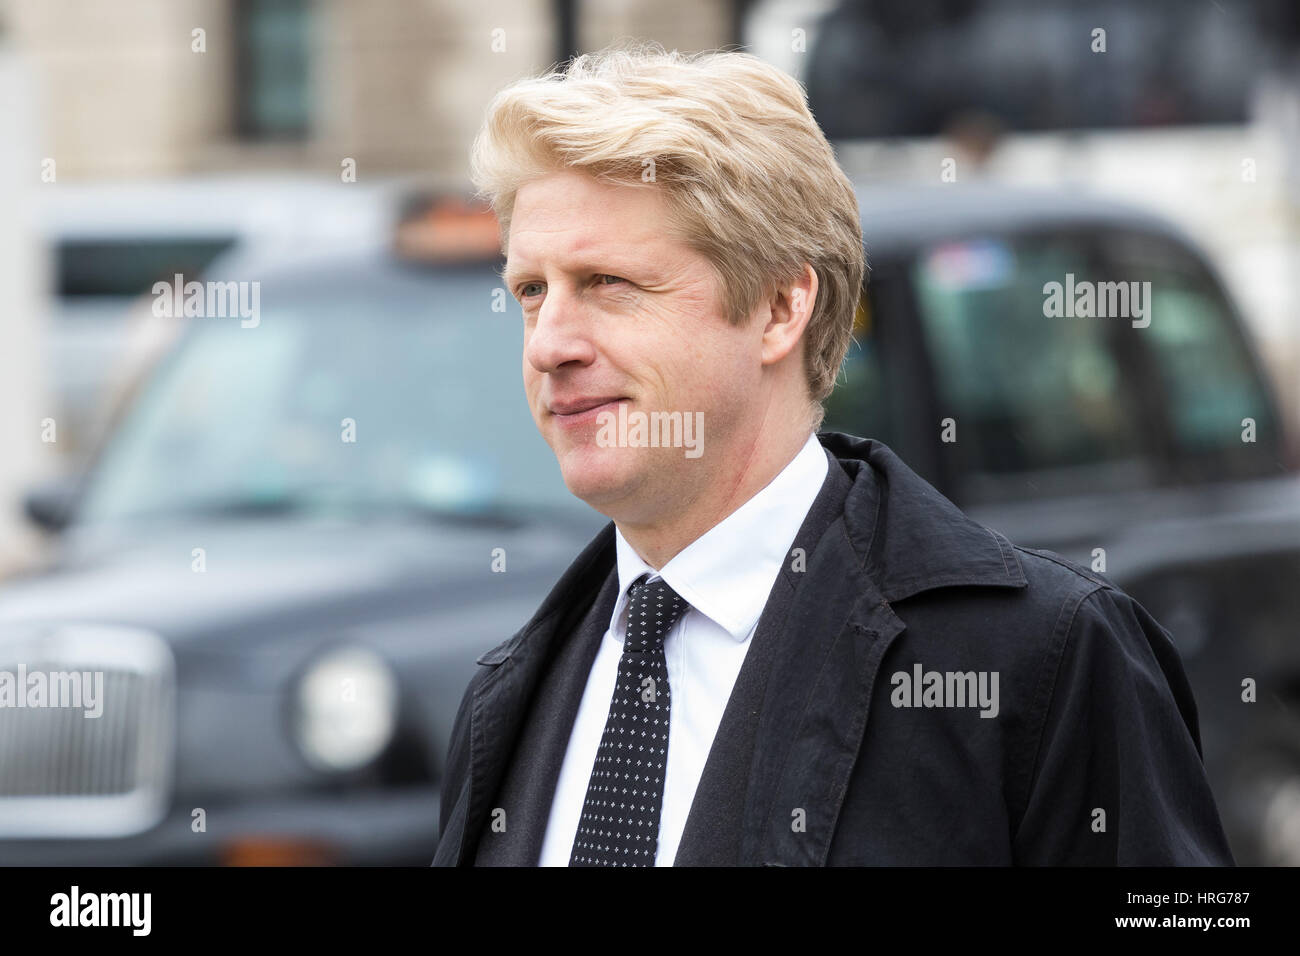 Westminster, London, March 1st 2017. Universities and Science Minister Jo Johnson, brother of Foreign Secretary Boris Johnson spotted outside Parliament, in Westminster. Credit: Paul Davey/Alamy Live News Stock Photo